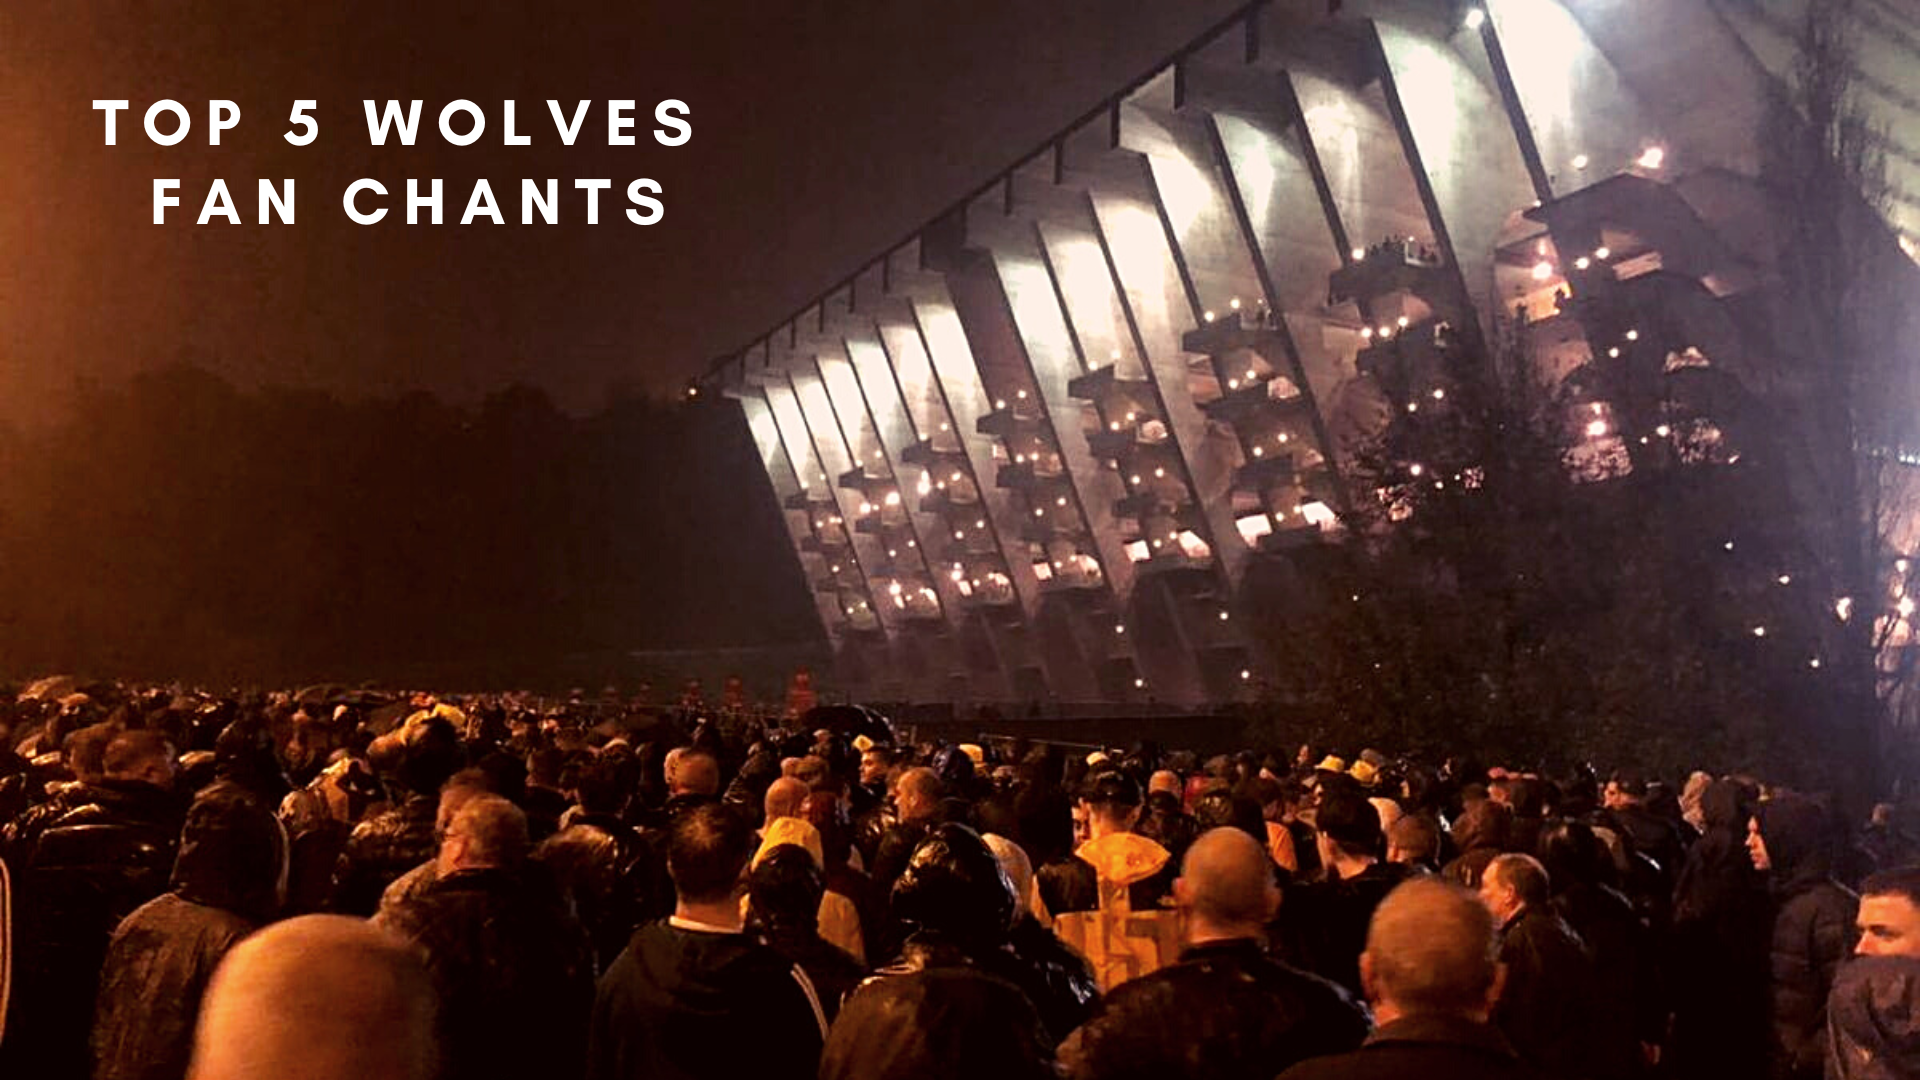 Here is the list of top 5 Wolves fan chants. (Photo: Phil Bradley)